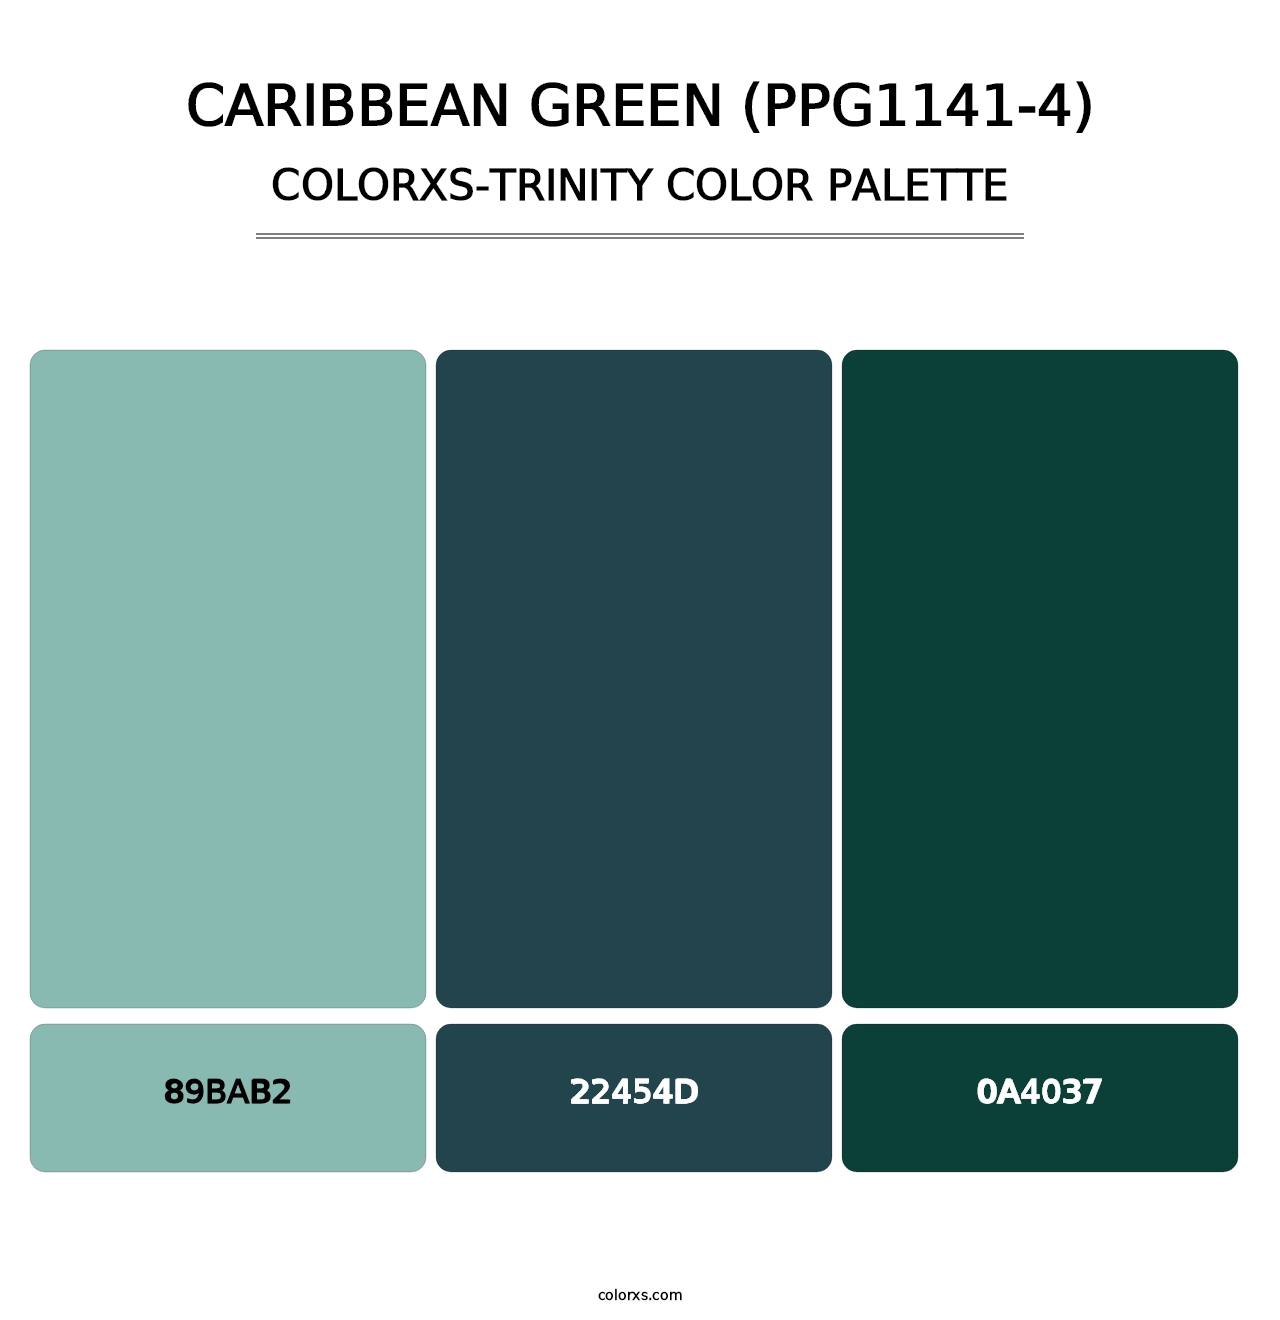 Caribbean Green (PPG1141-4) - Colorxs Trinity Palette